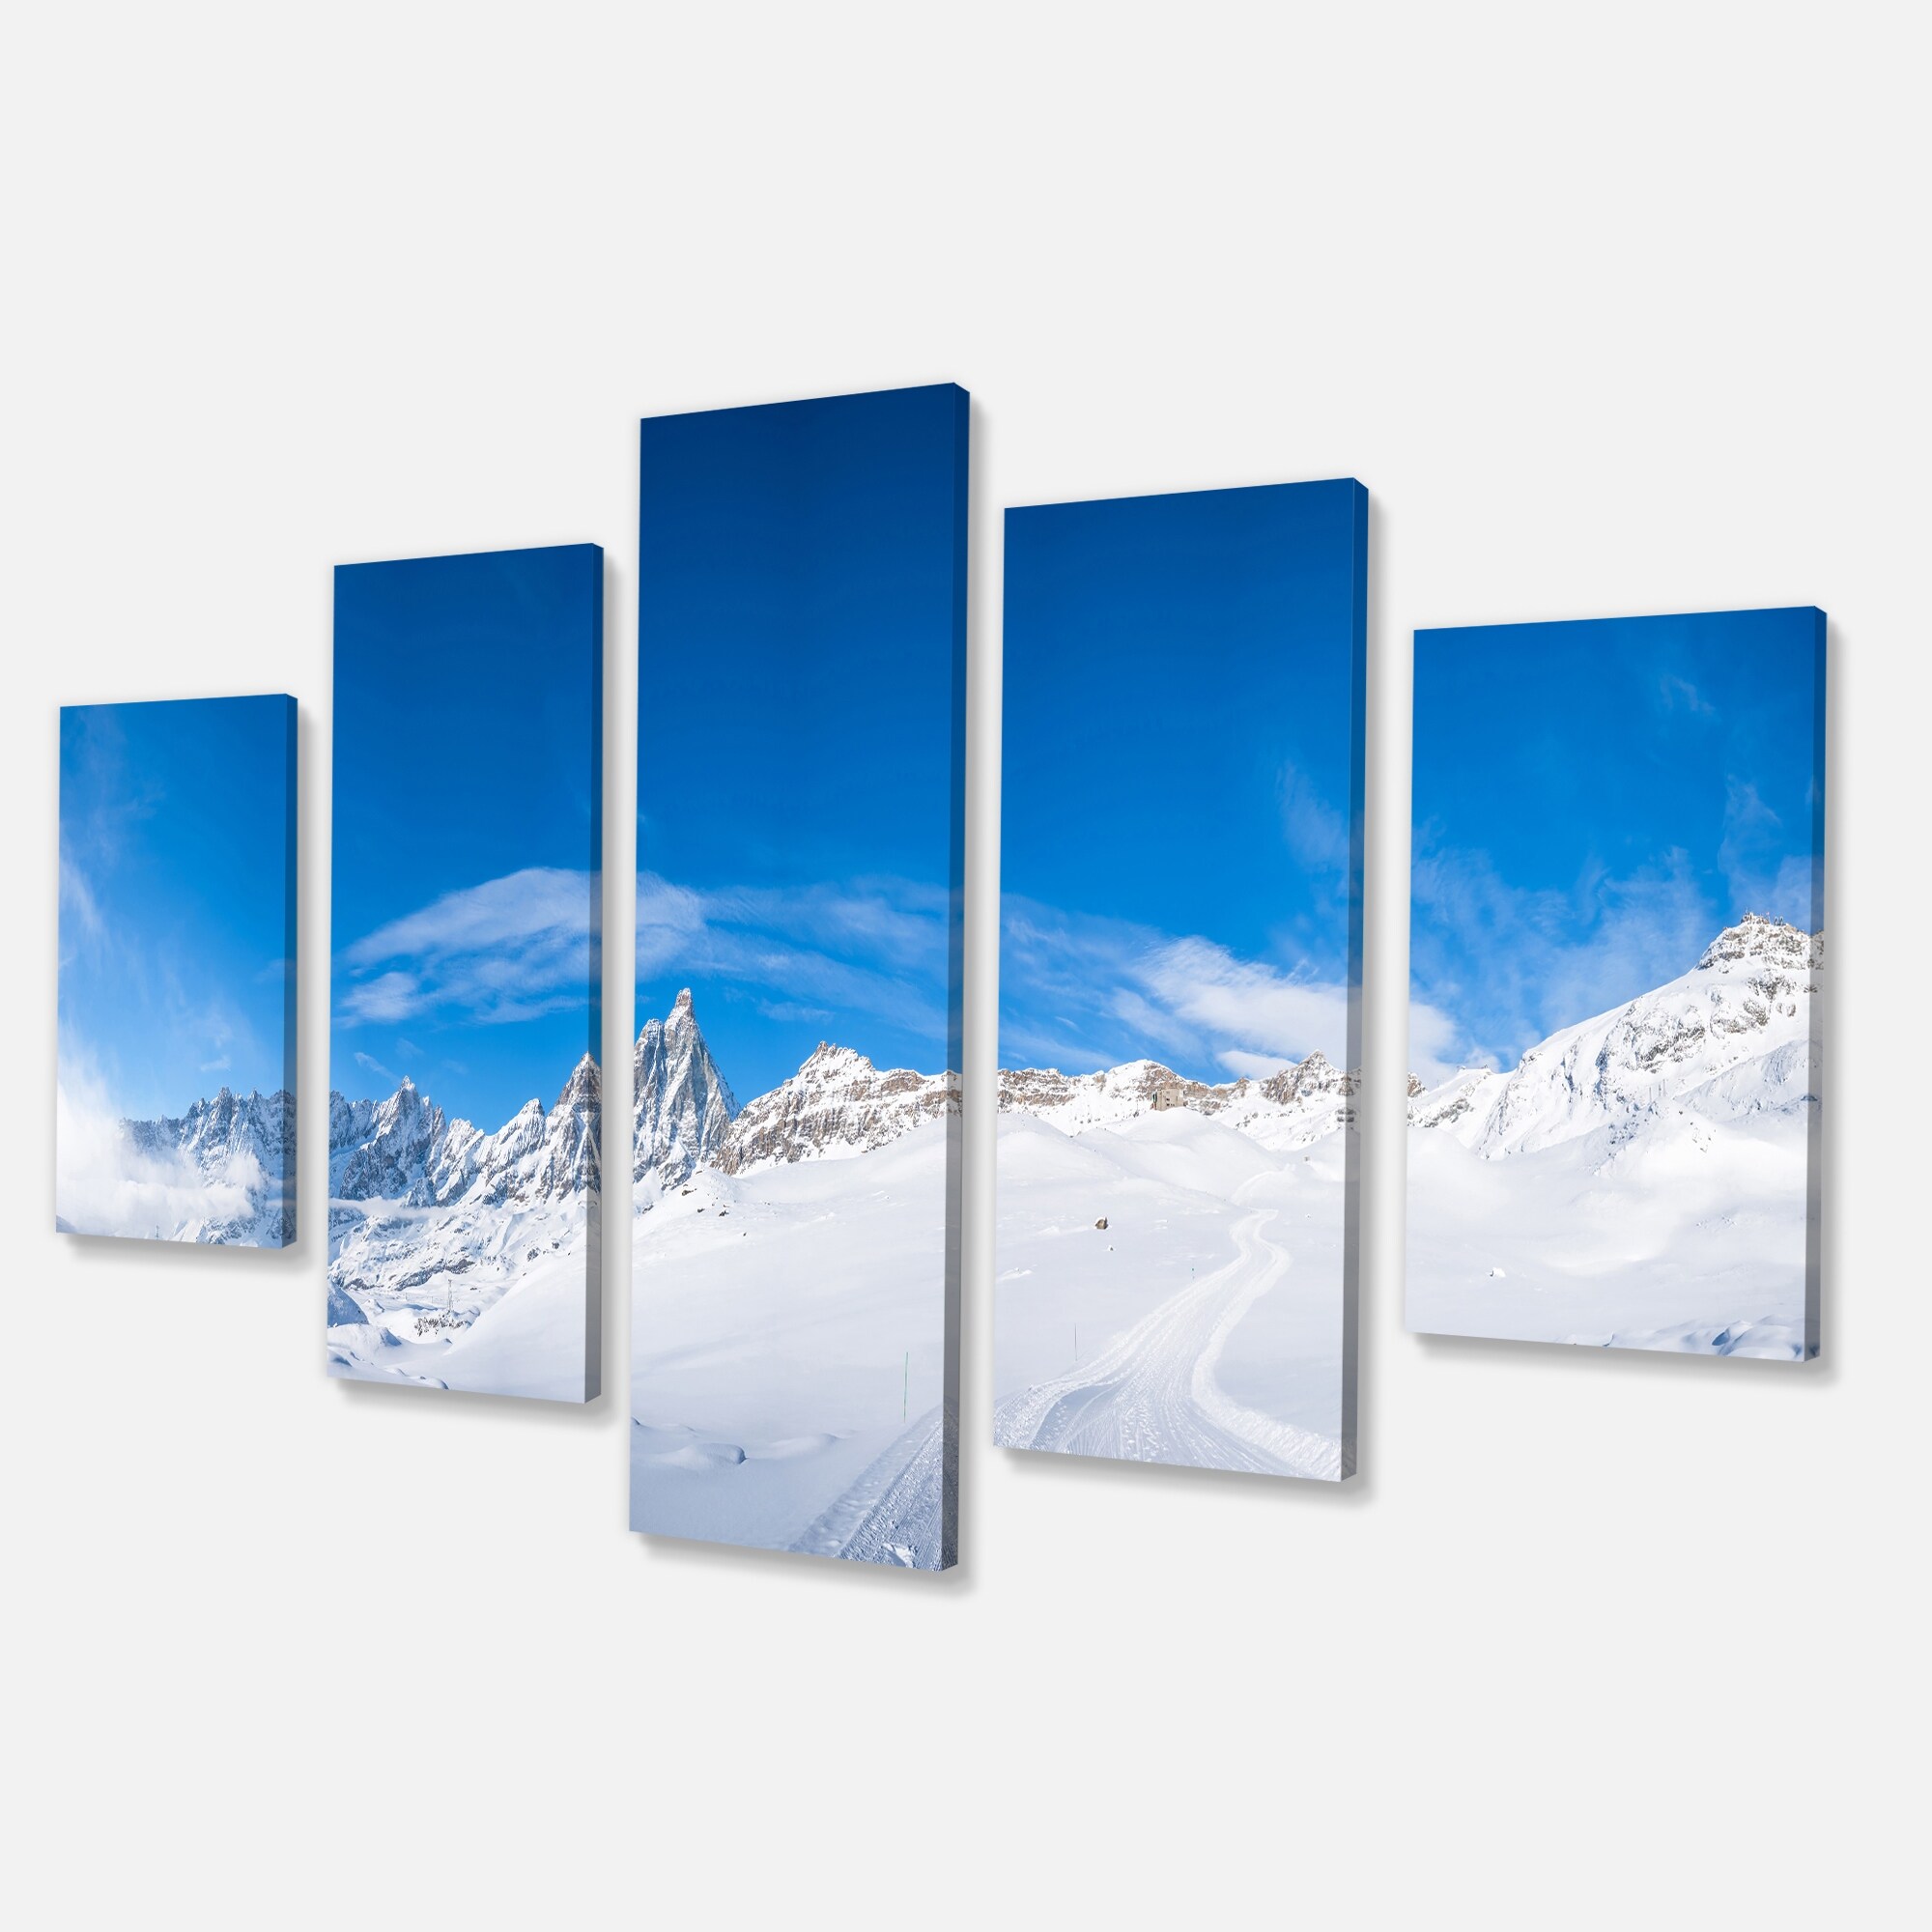 Designart Relaxing View of Nature landscapes Photography on Wrapped Canvas Set - 70 in. Wide x 28 in. High - 6 Panels